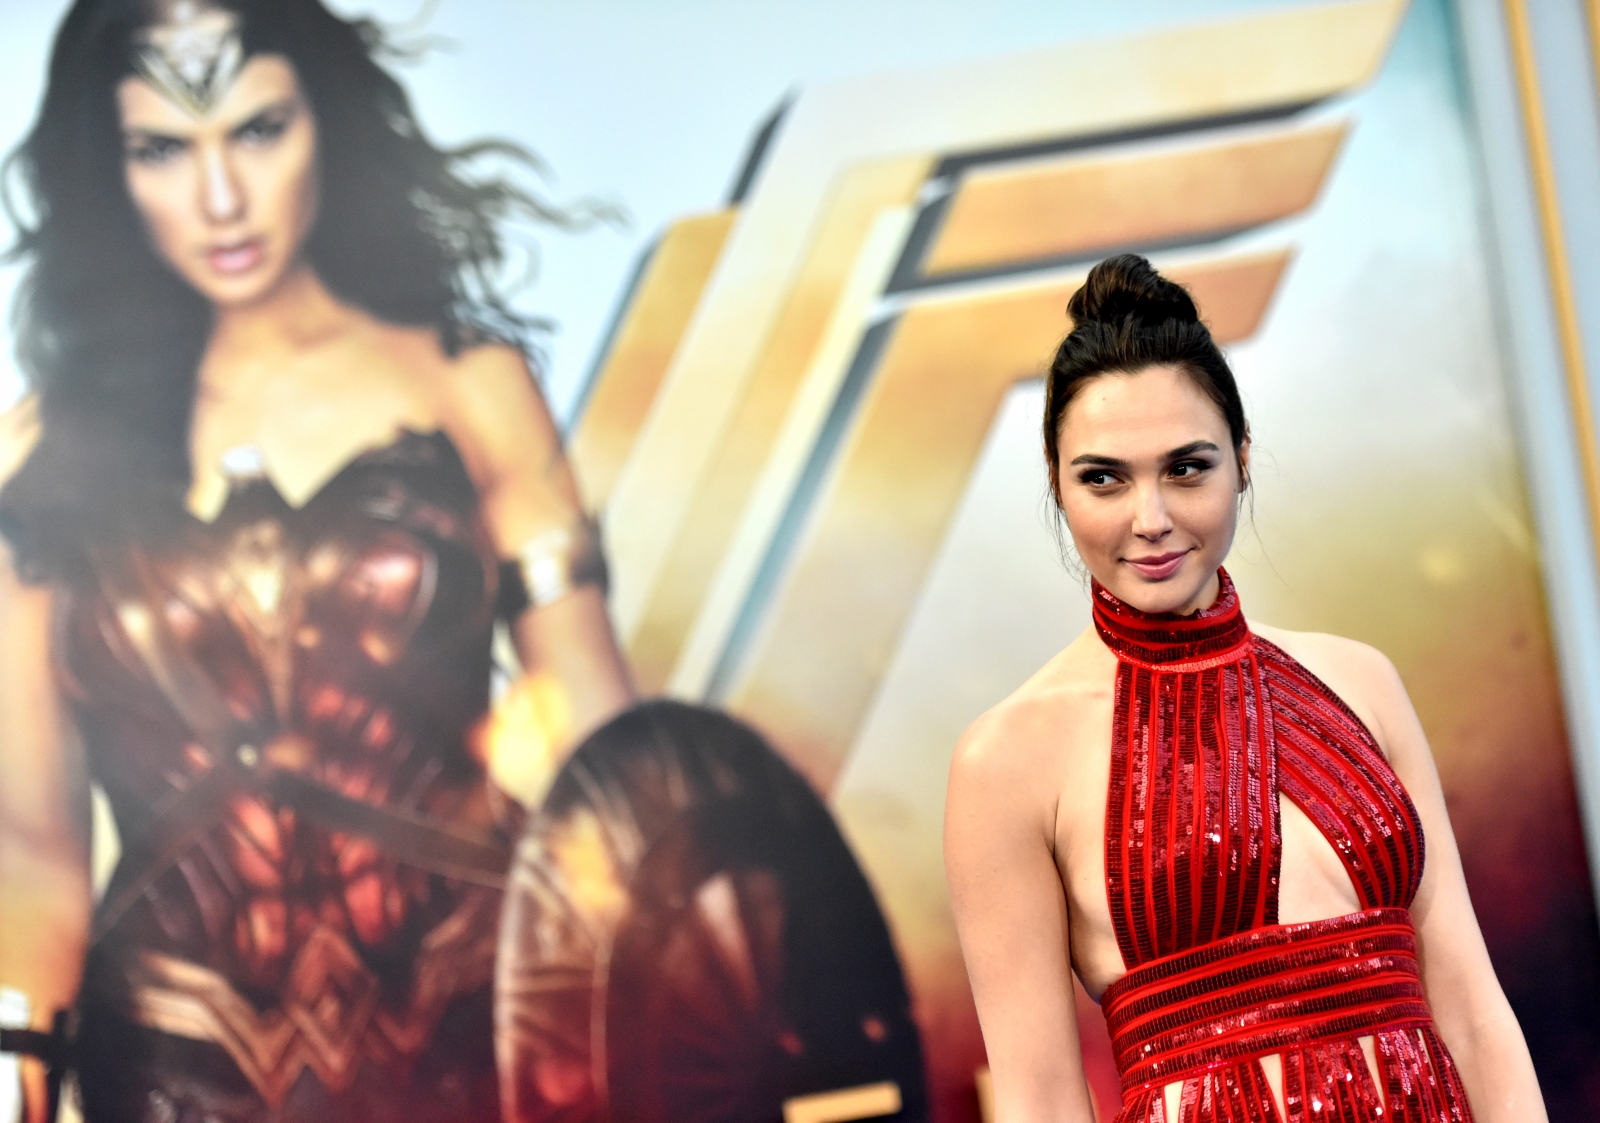 What makes Wonder Woman different from the variety of superhero flicks